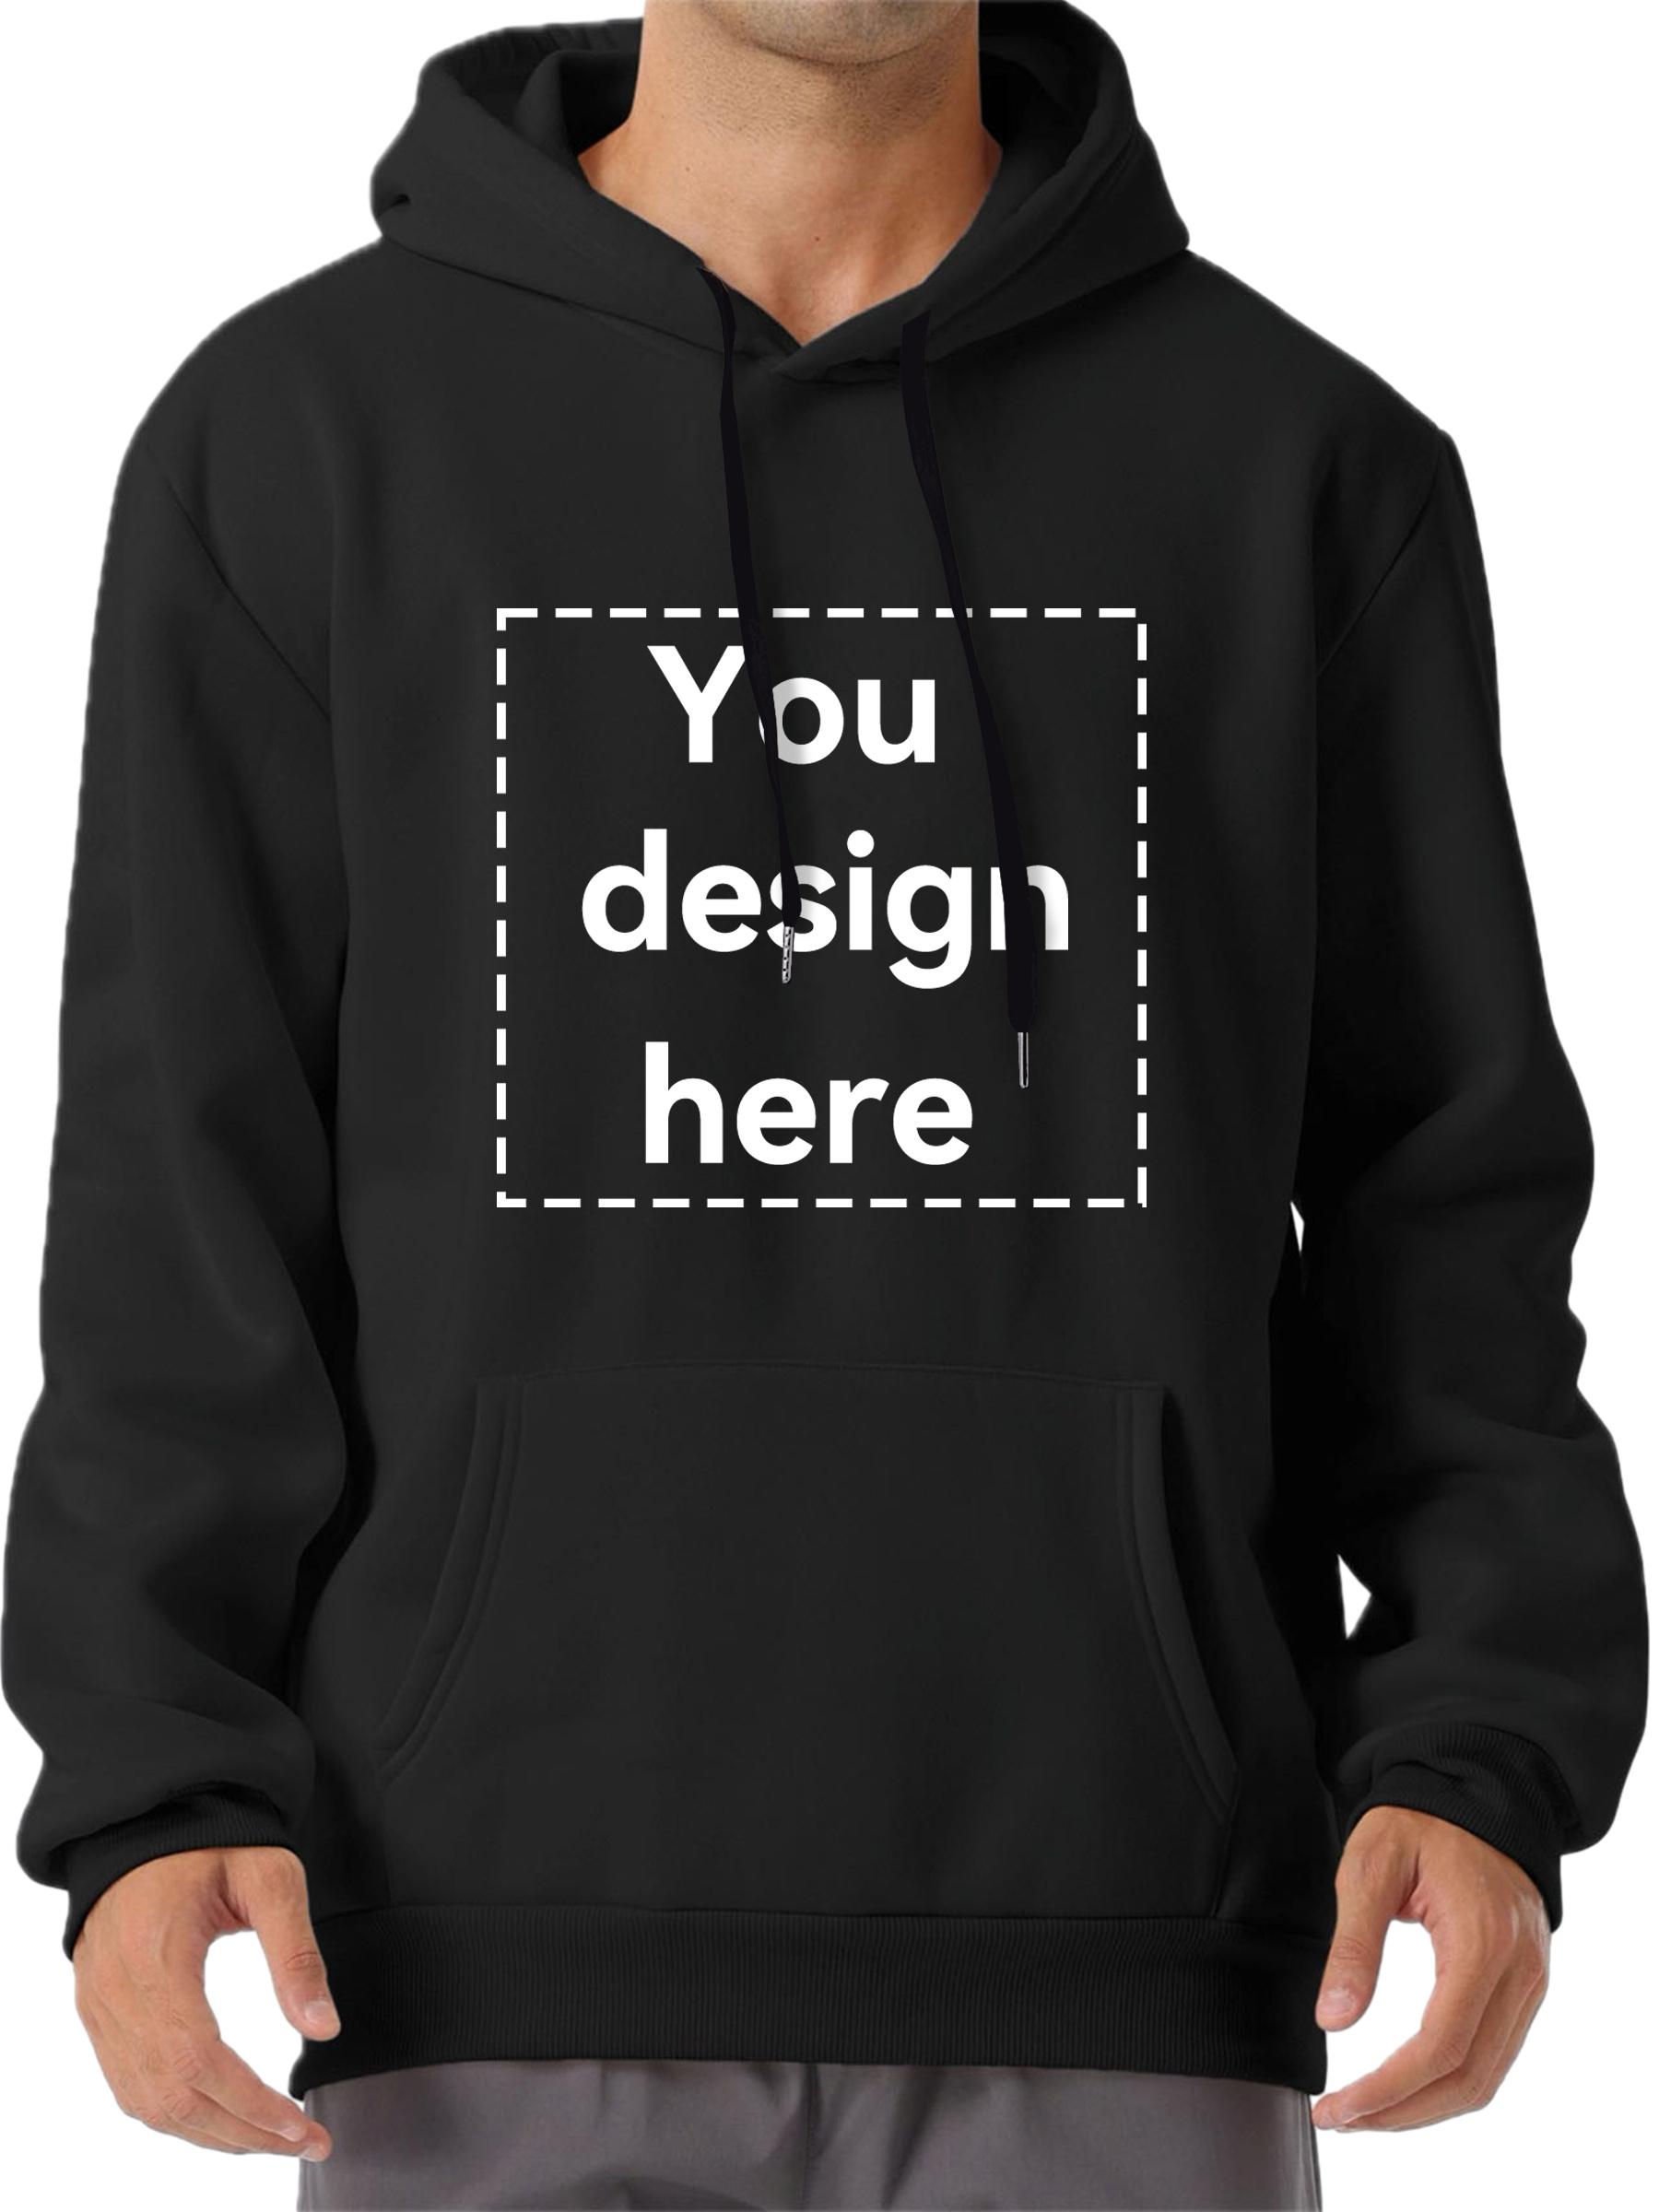 you design here letter print customized kangaroo pocket hoodie casual long sleeve hoodies pullover sweatshirt mens clothing for fall winter details 31